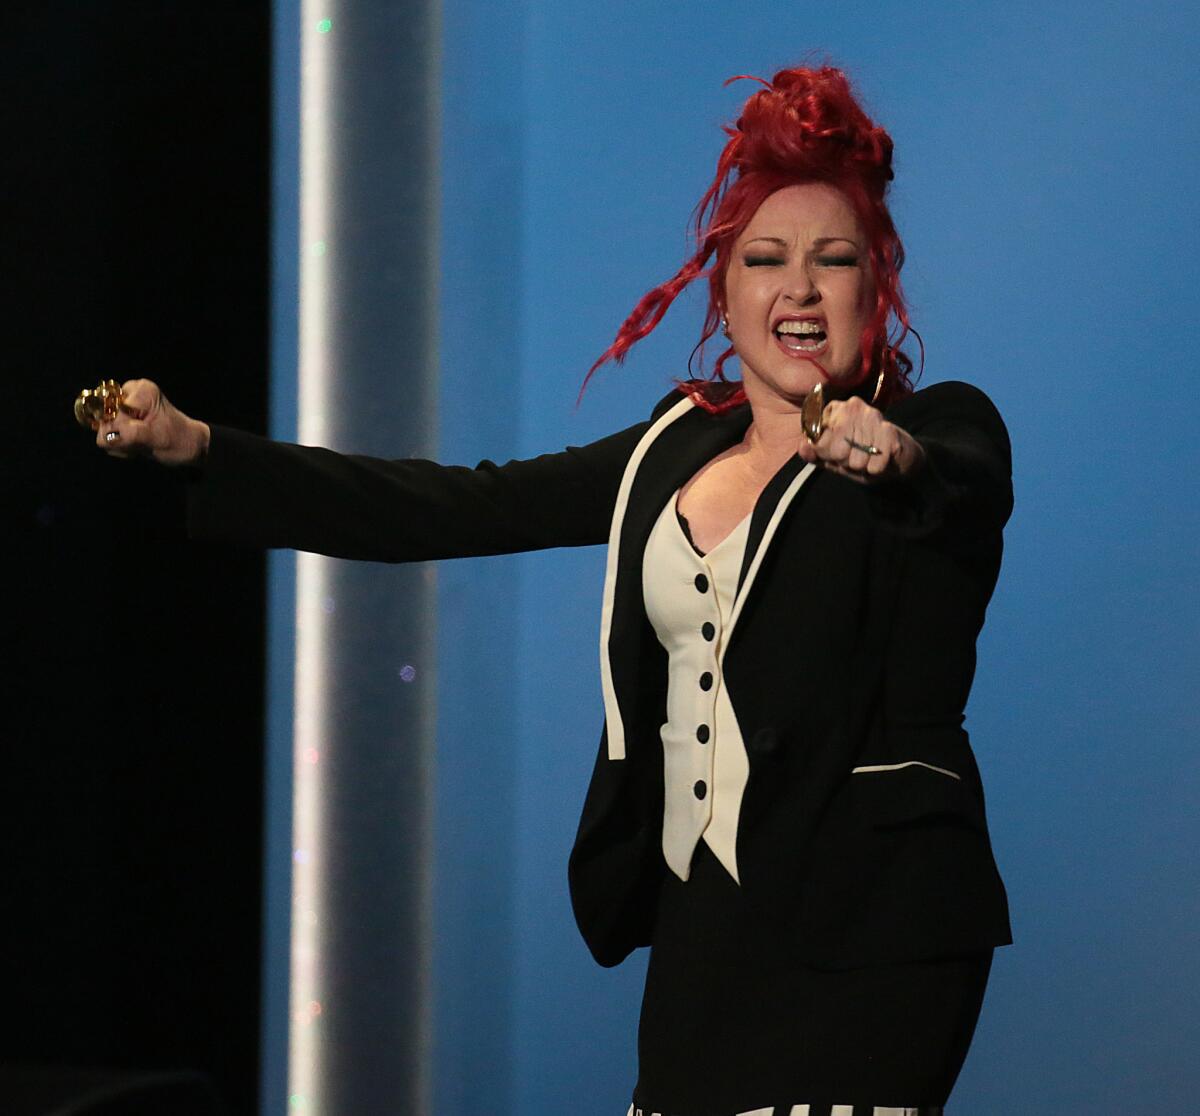 Cyndi Lauper accepts the musical theater album award for "Kinky Boots" at the pre-telecast of the Grammy Awards on Sunday at the Nokia Theatre in Los Angeles.